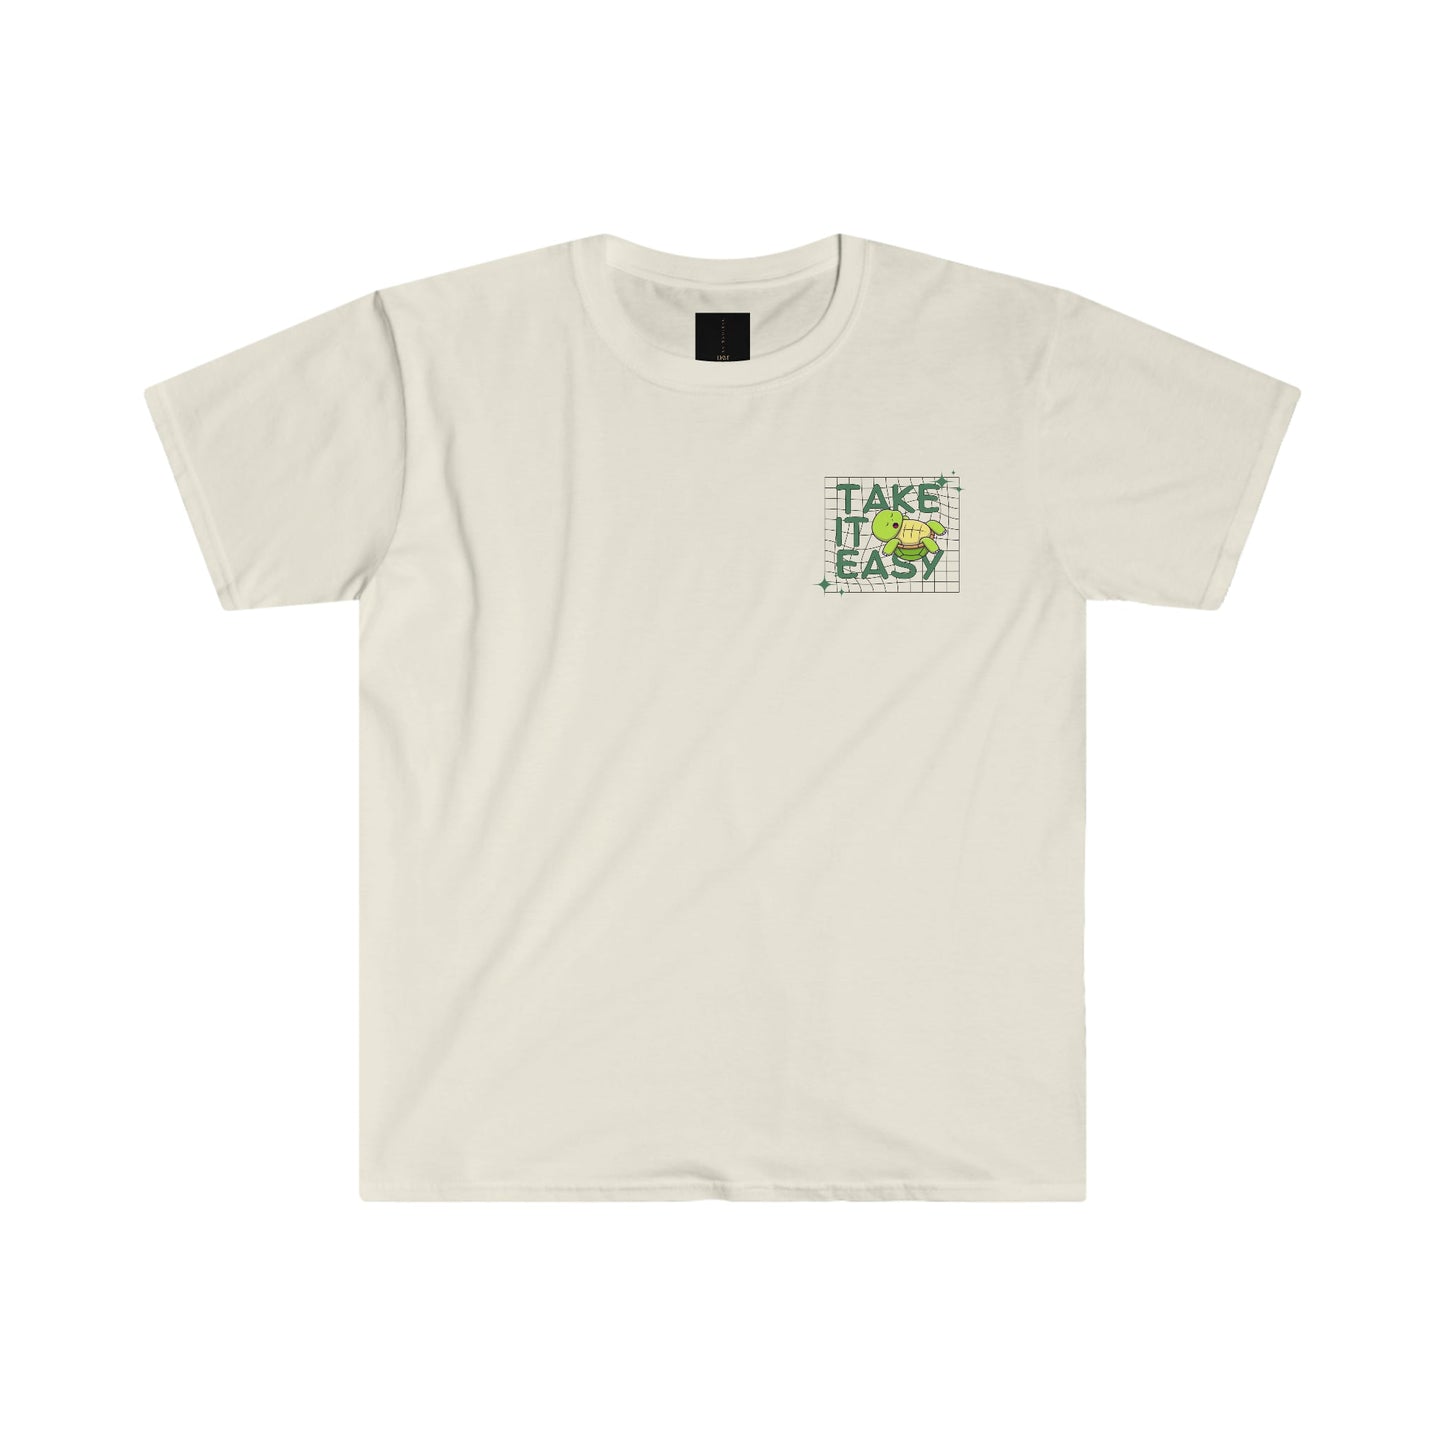 Take It Easy:Unisex T-Shirt! - Designs by DKMc